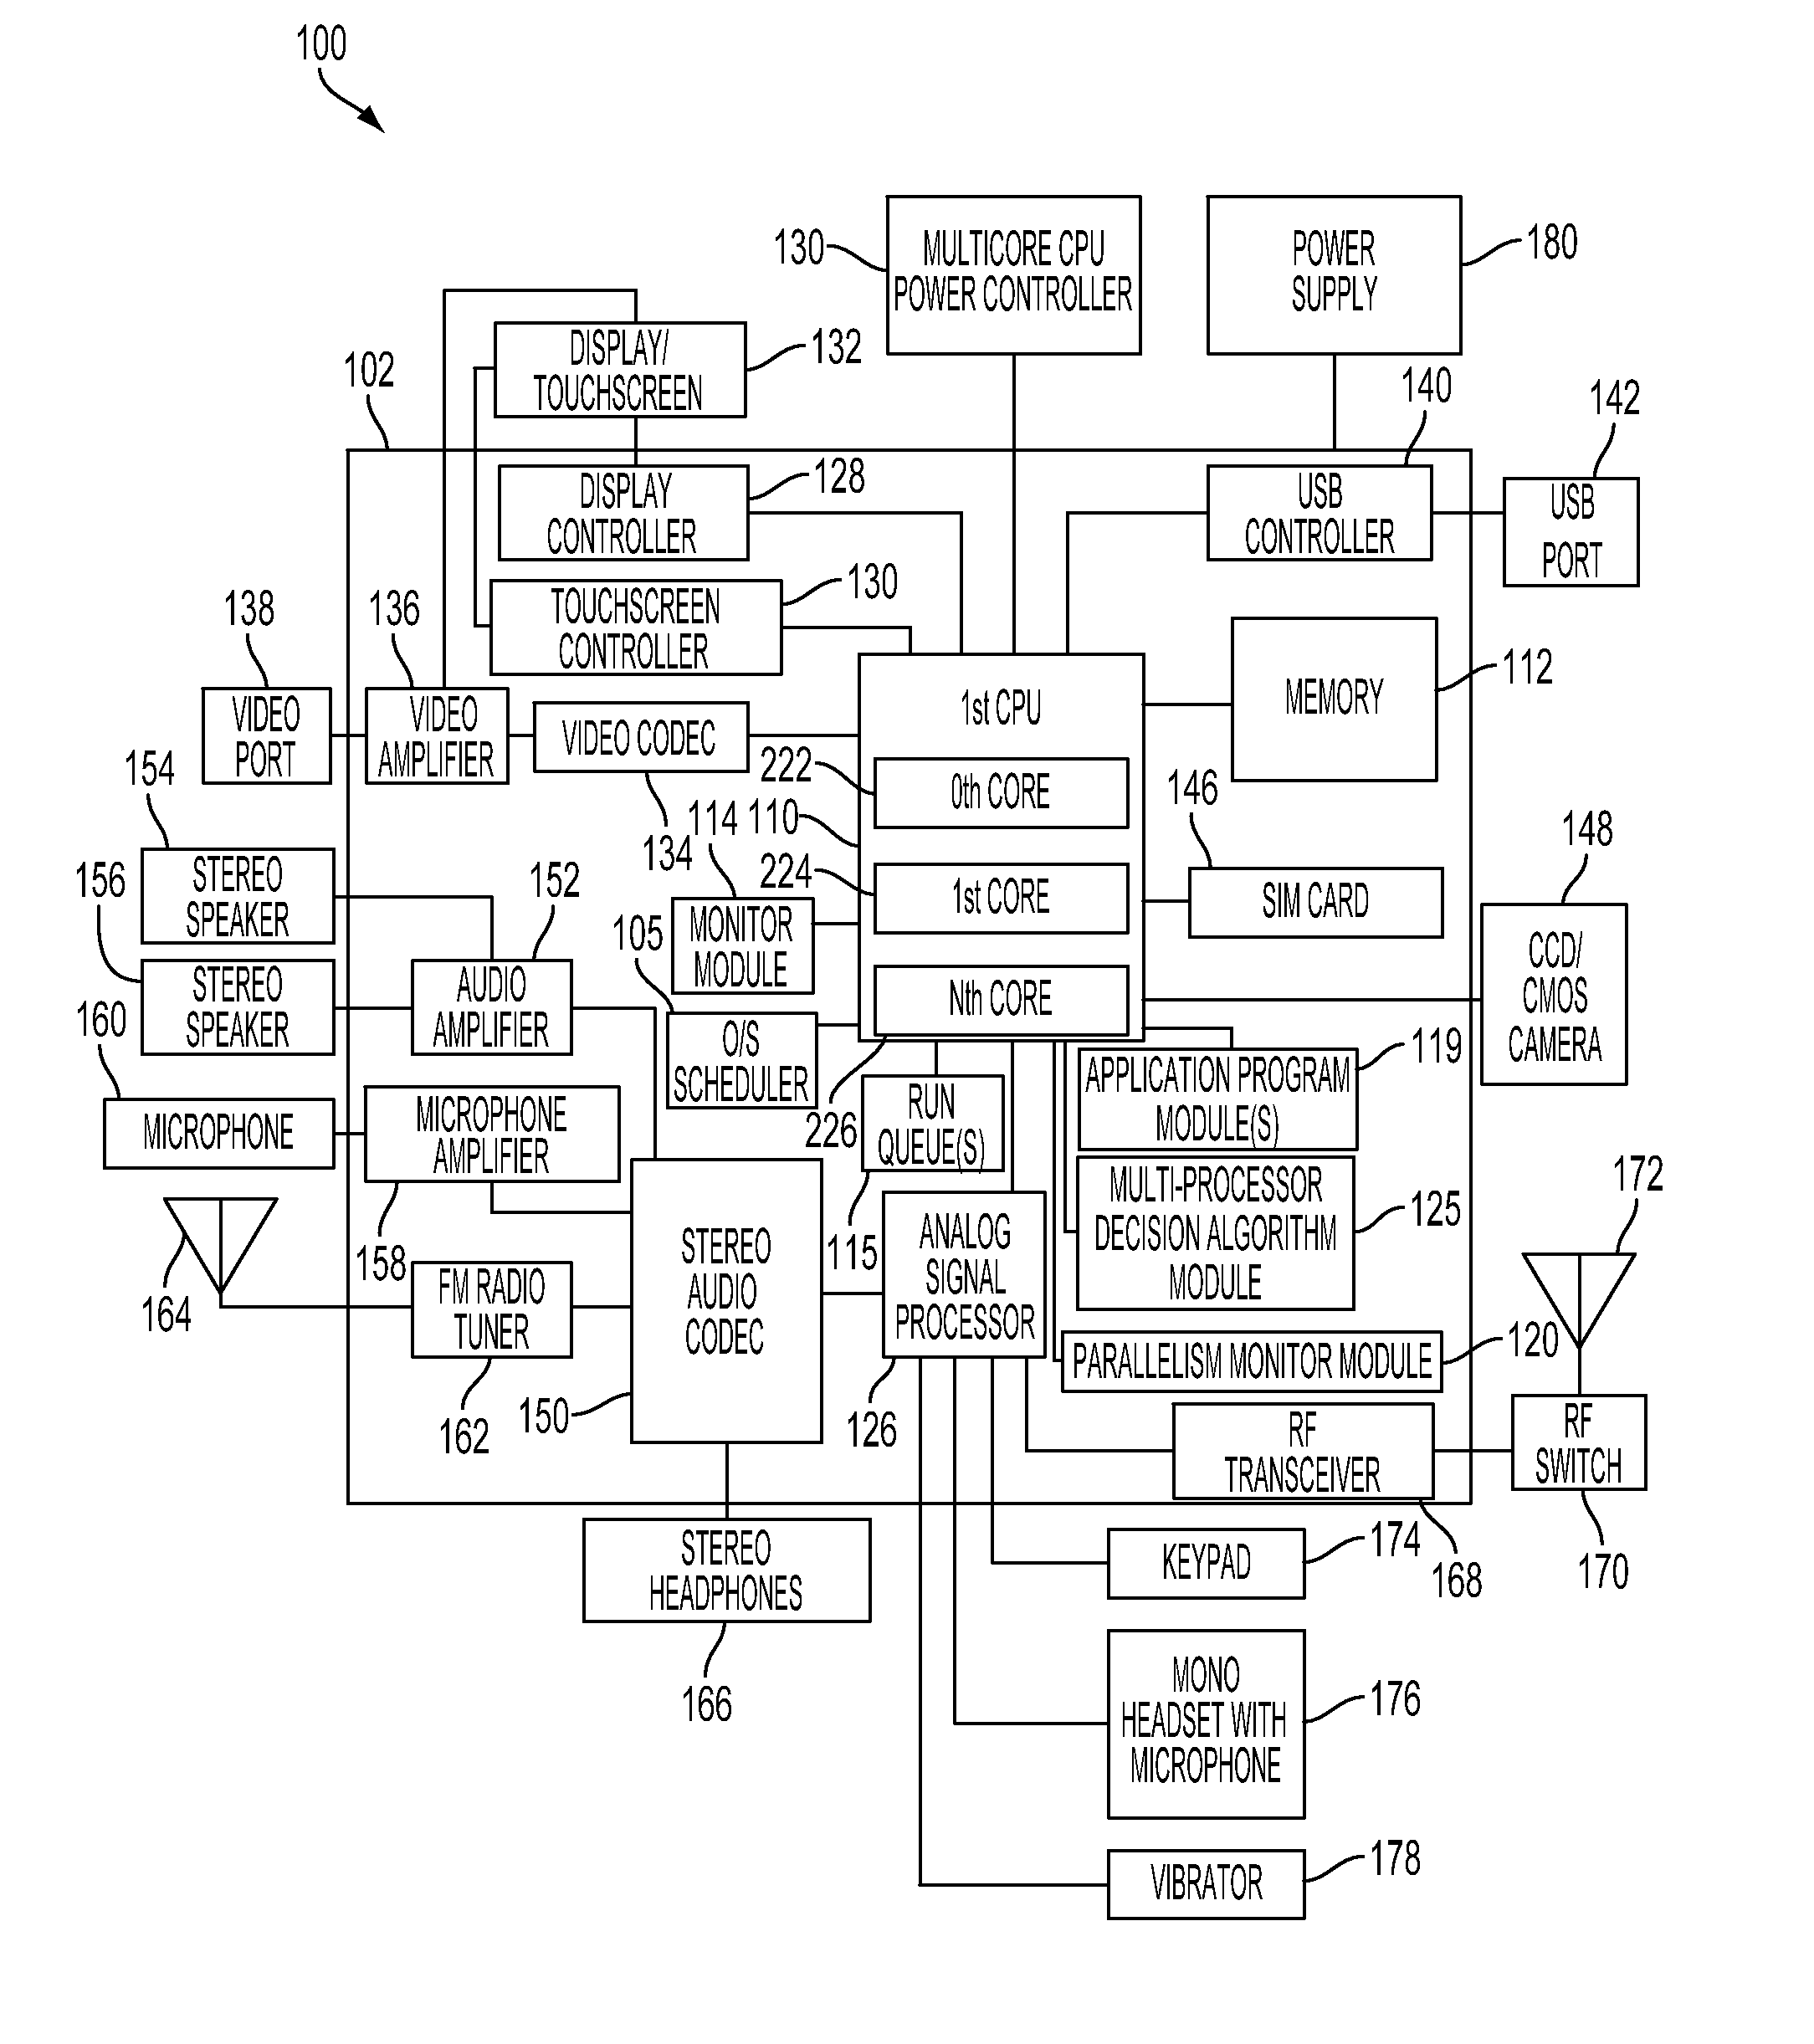 Method and system for dynamically controlling power to multiple cores in a multicore processor of a portable computing device